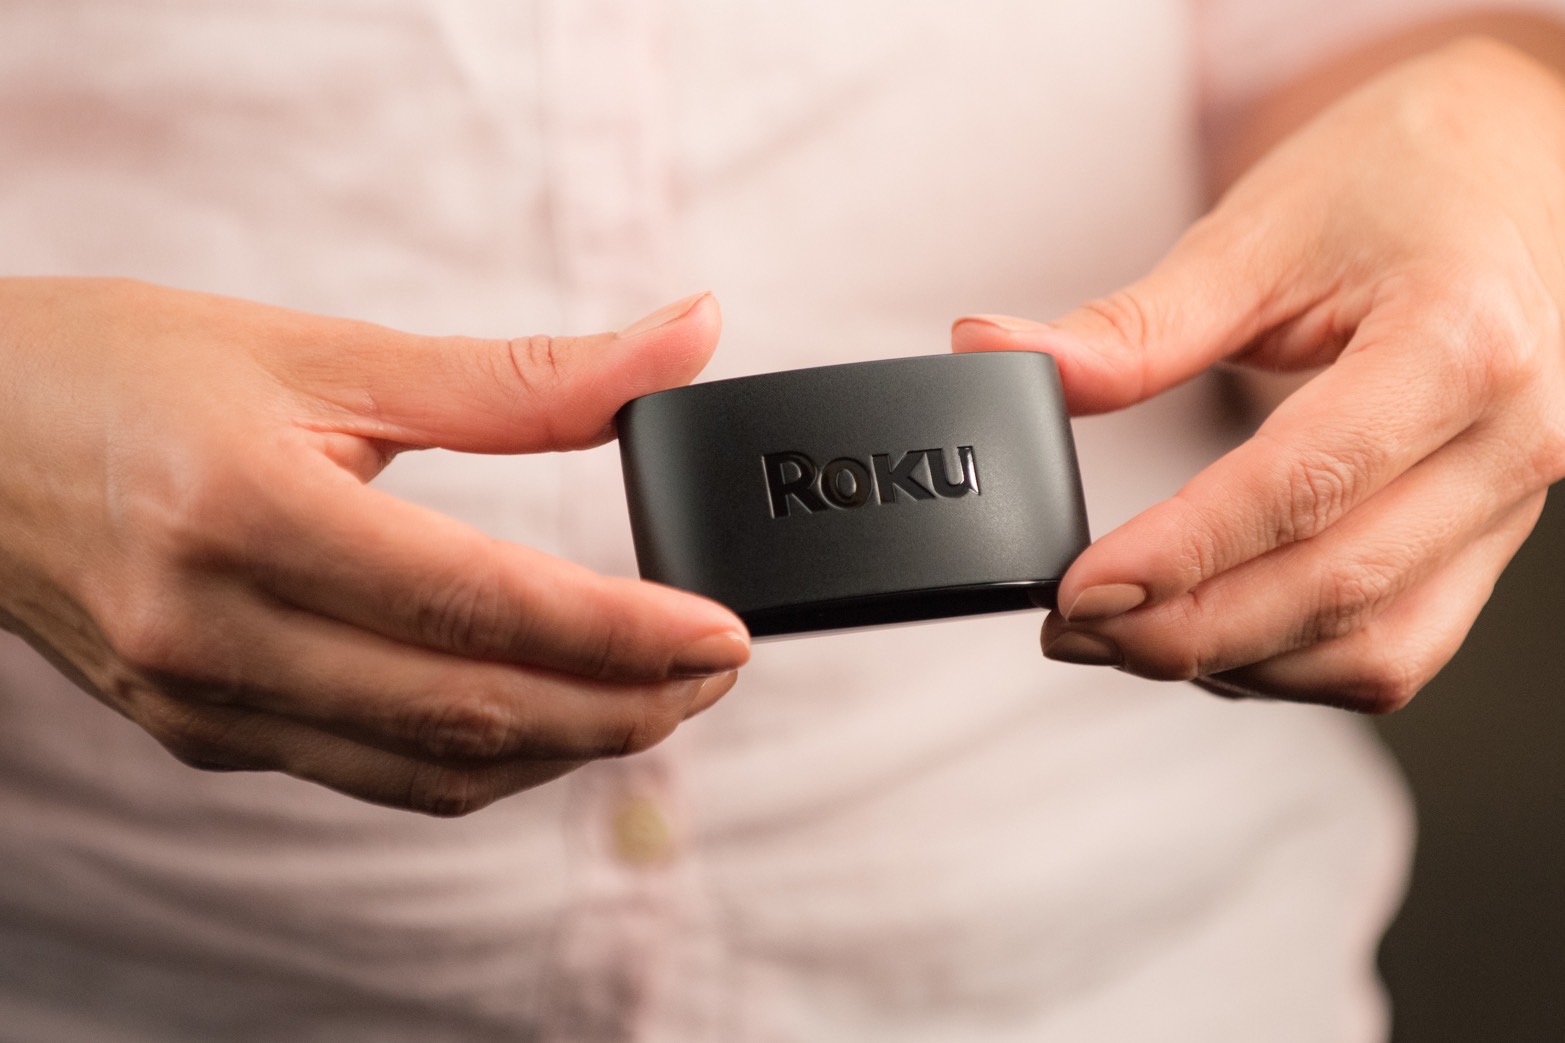 Roku Express in a person's hands.